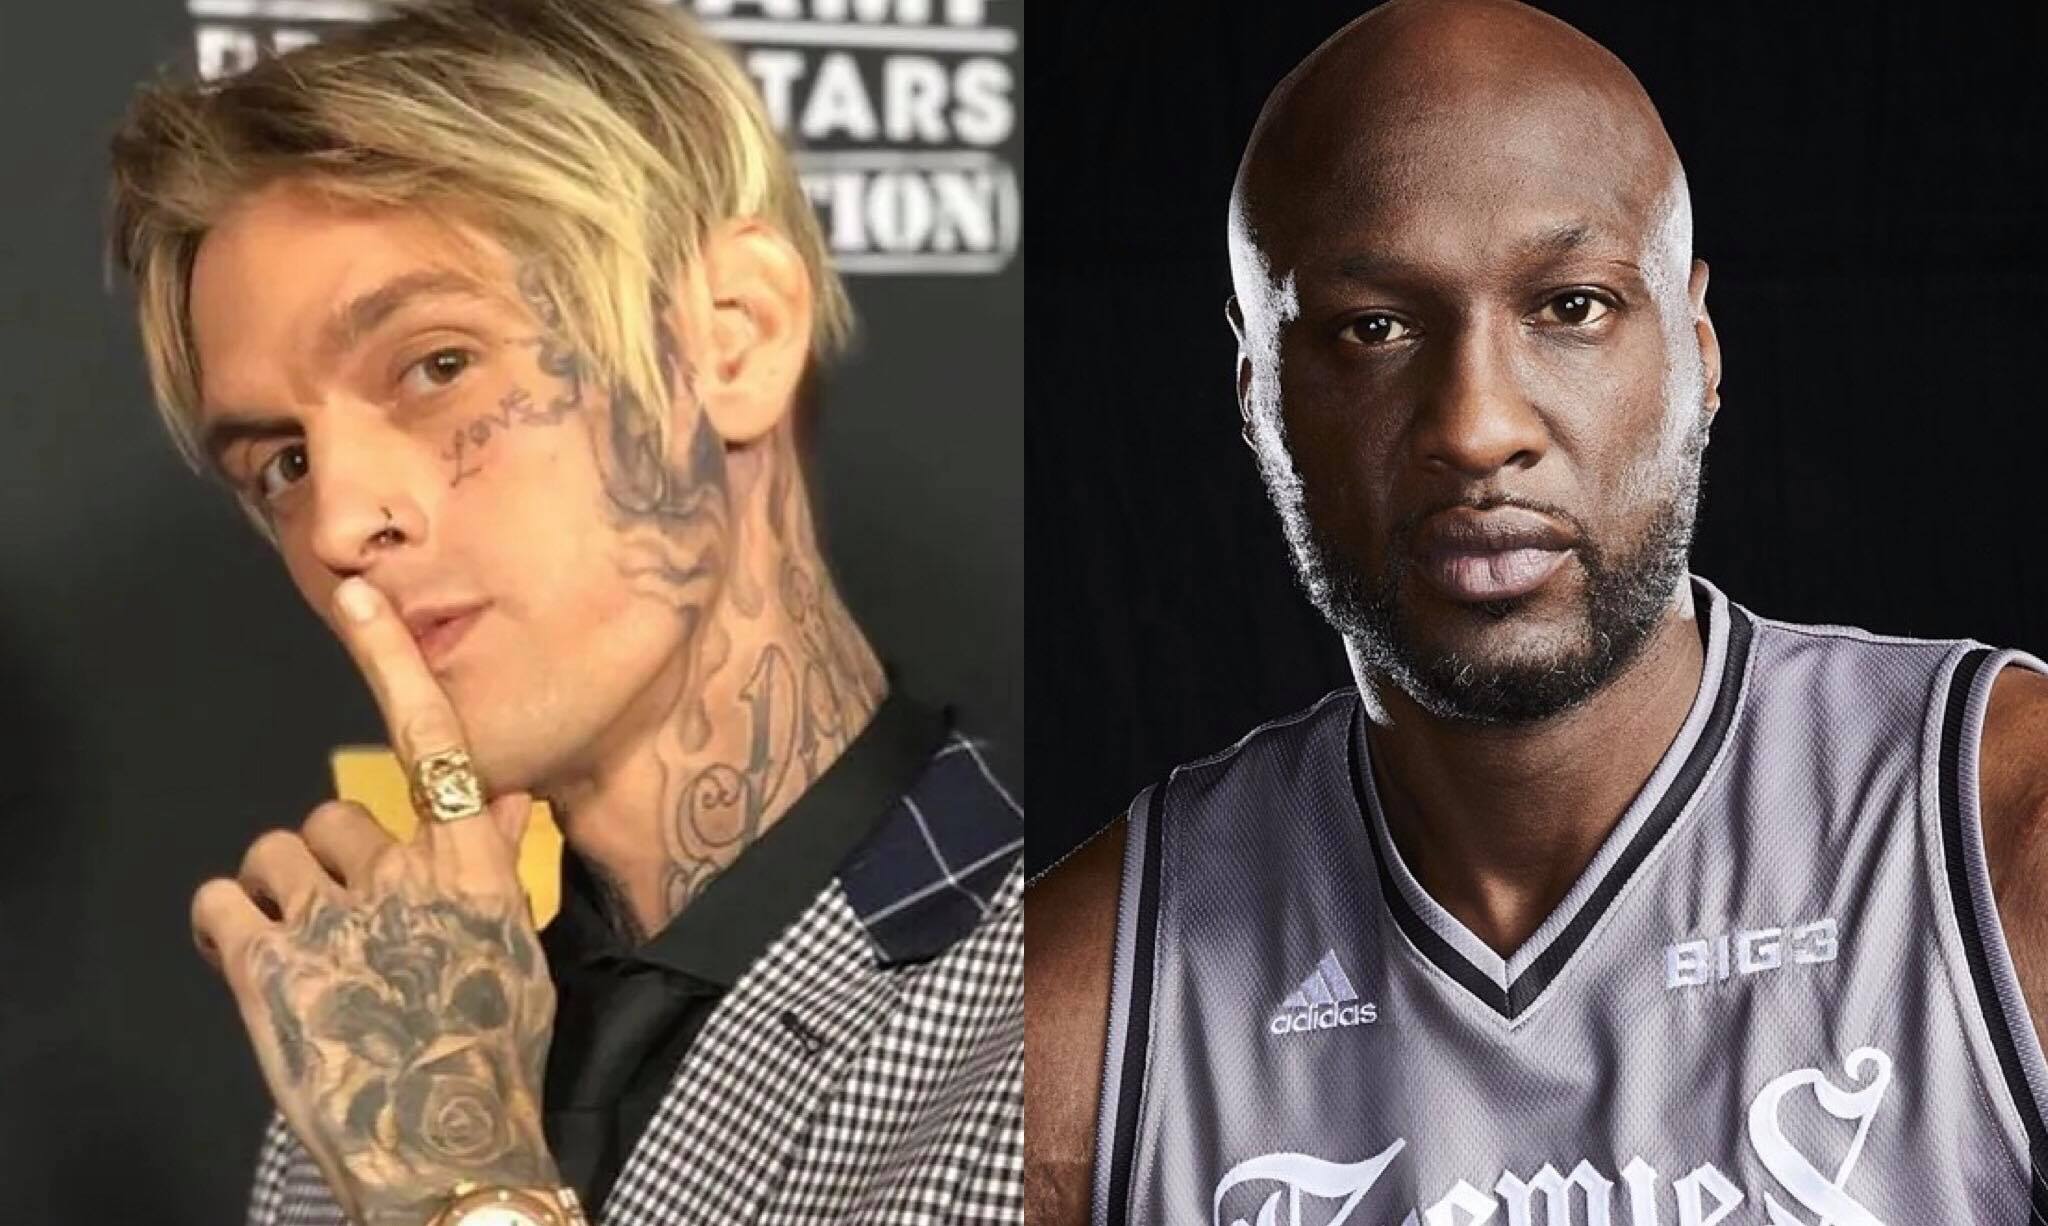 Carter Lamar Odom to compete in boxing match Cult MTL